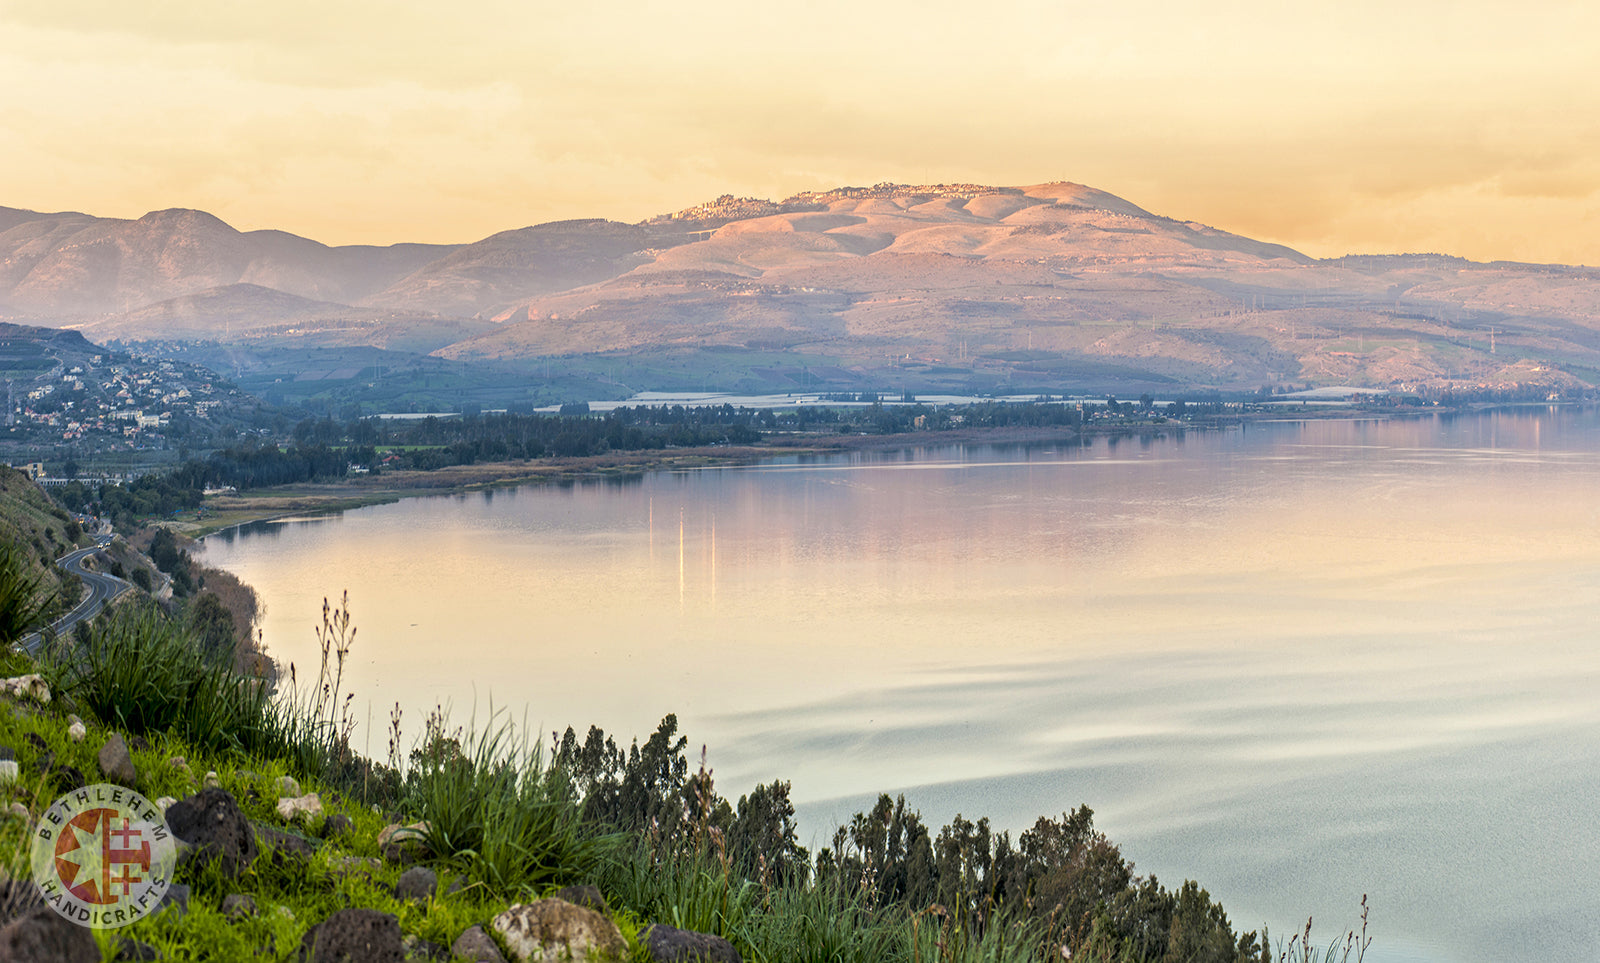 Top 5 Holy Sites You Must Visit at the Sea of Galilee